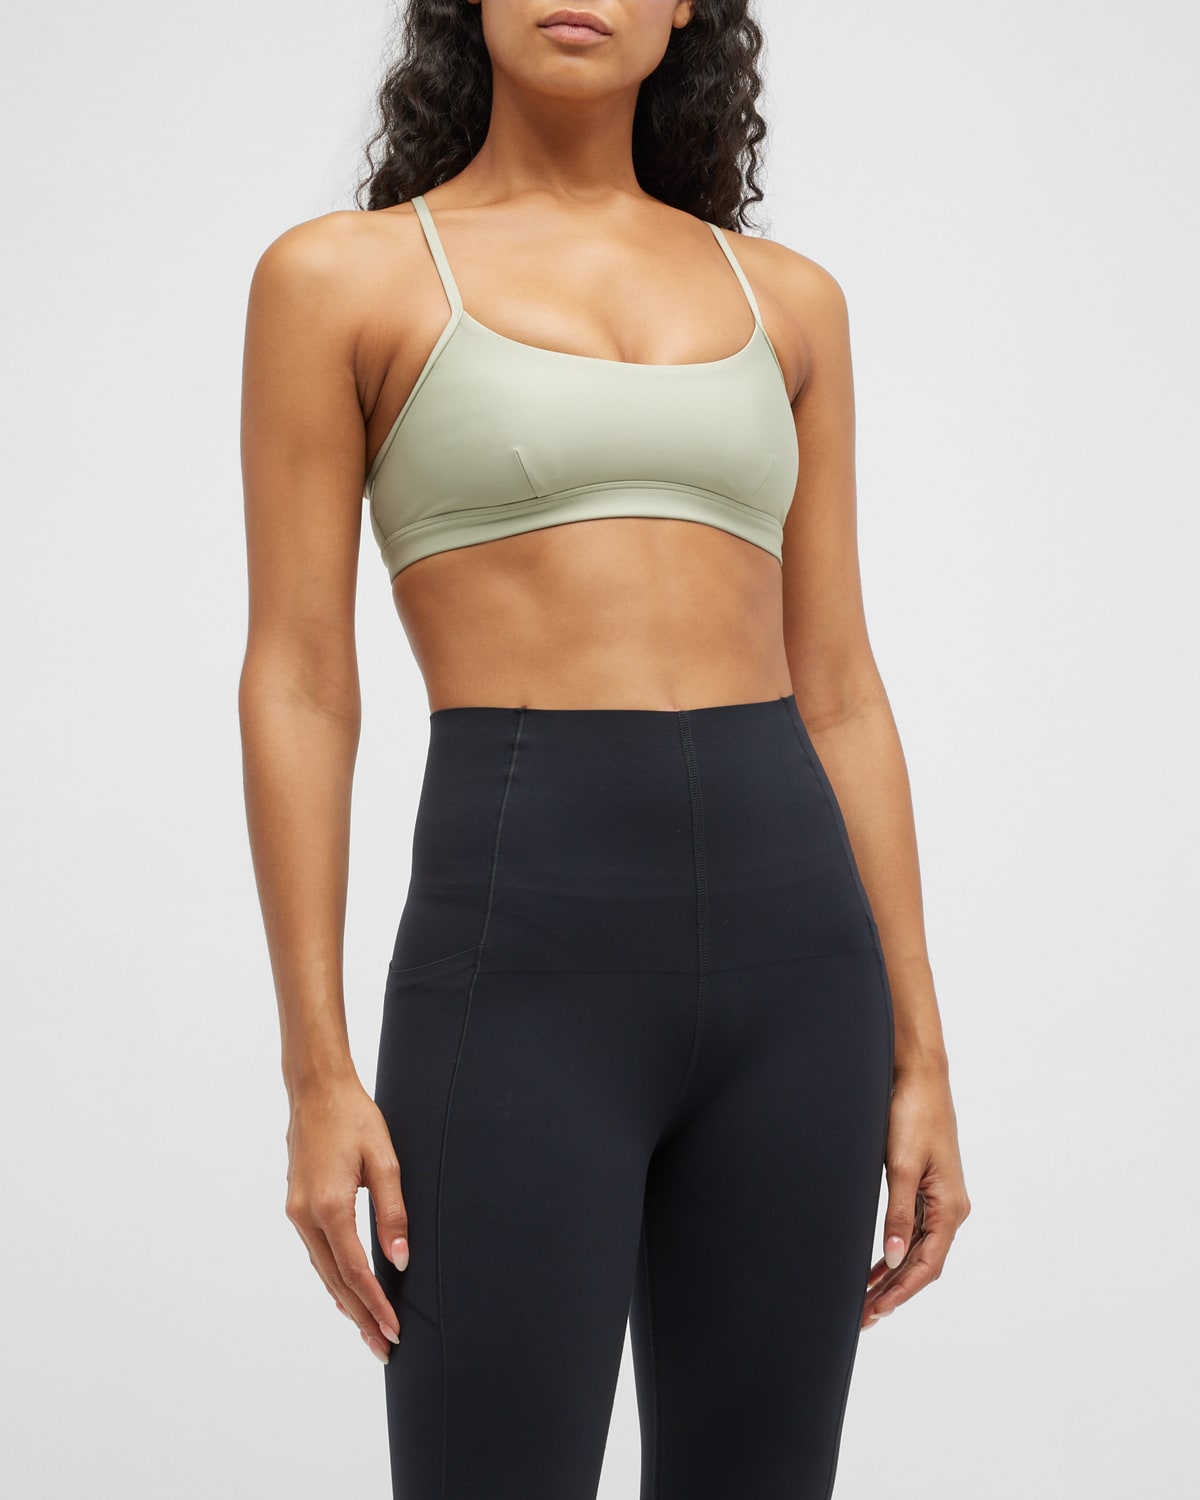 light & leaf Ruched Yoga Sports Bra Cross Back with Removable Cups Low Support Activewear 